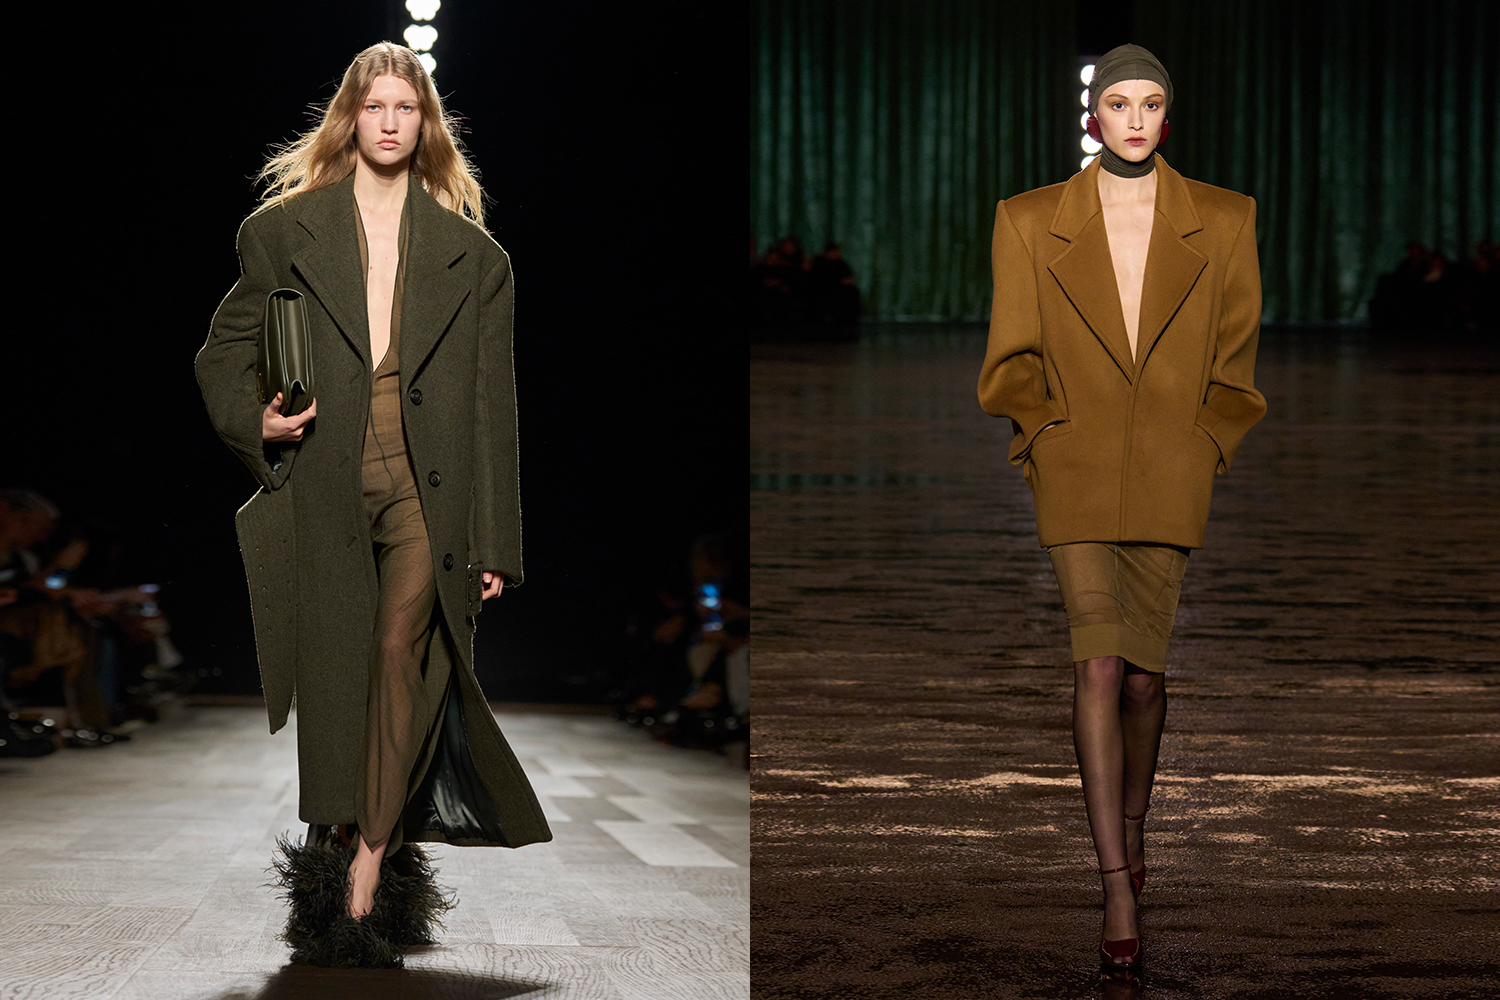 FW20 Fashion Trend Report: Women's Fashion Trends For Fall/Winter